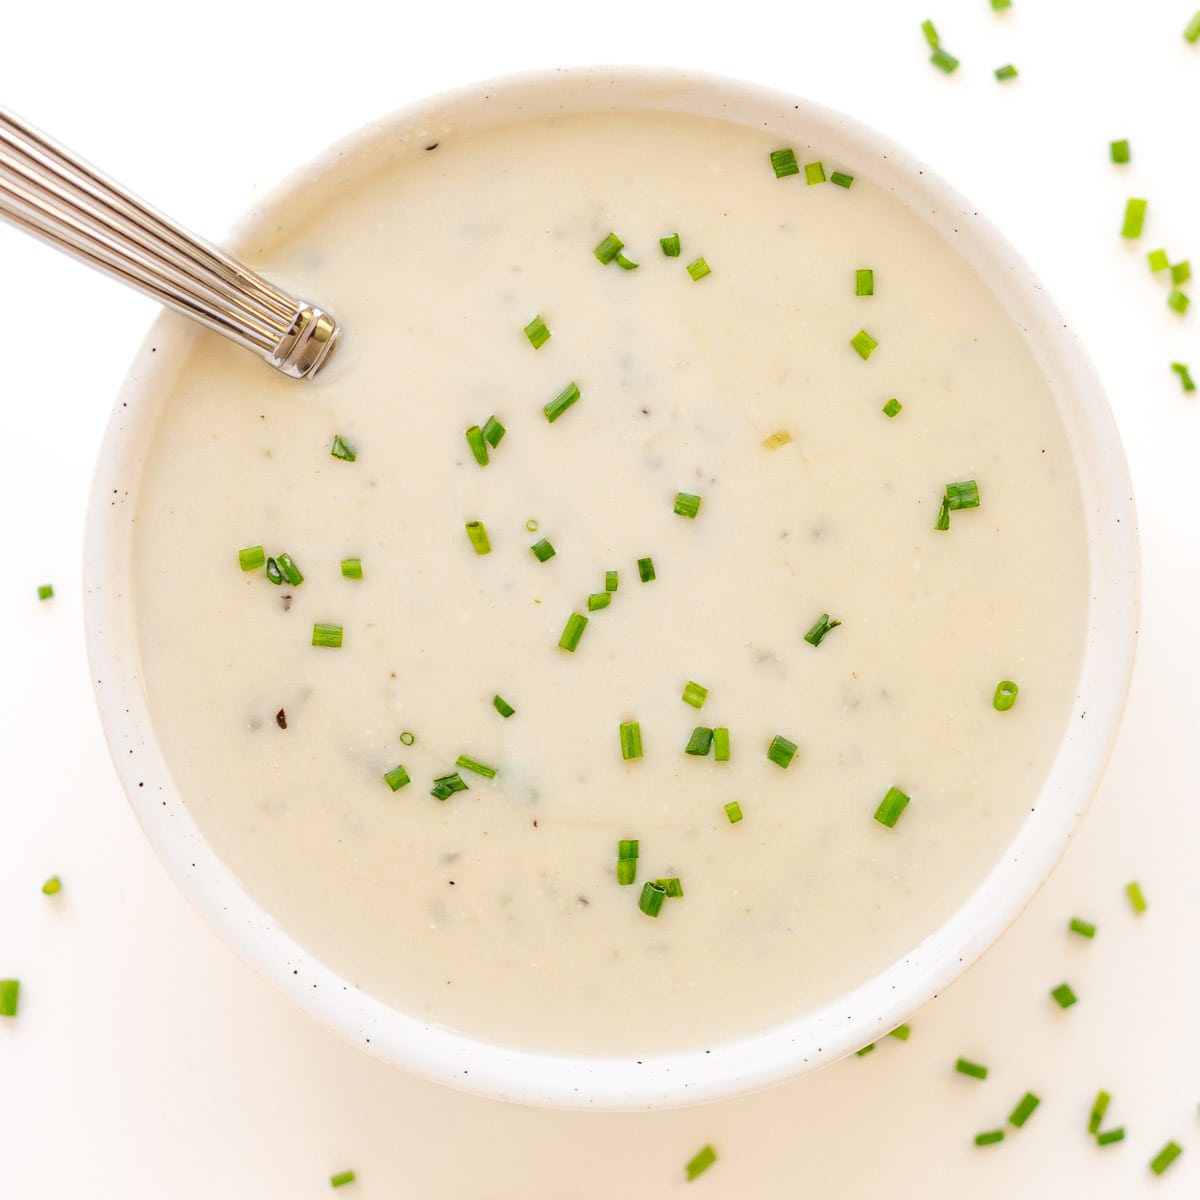 Bowl of creamy gorgonzola sauce garnished with chopped chives.